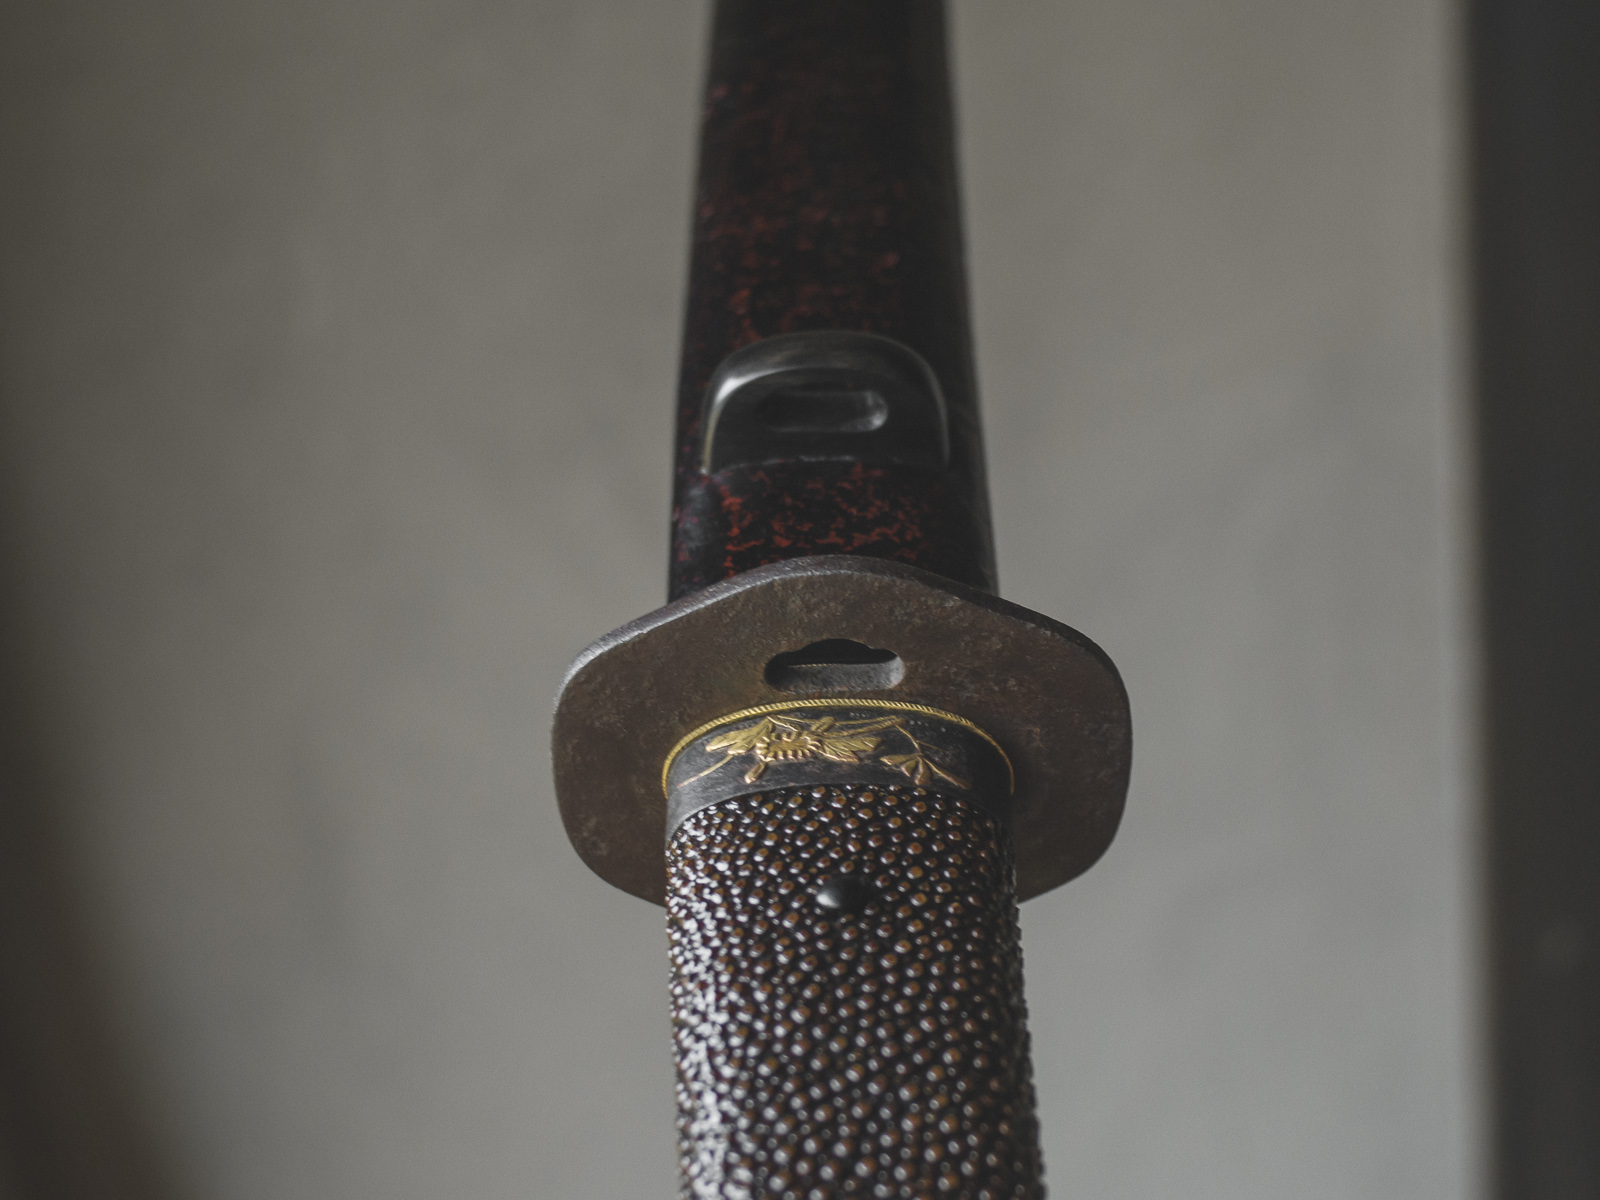 Island Blacksmith: Hand crafted tanto koshirae made from reclaimed and natural materials using traditional techniques